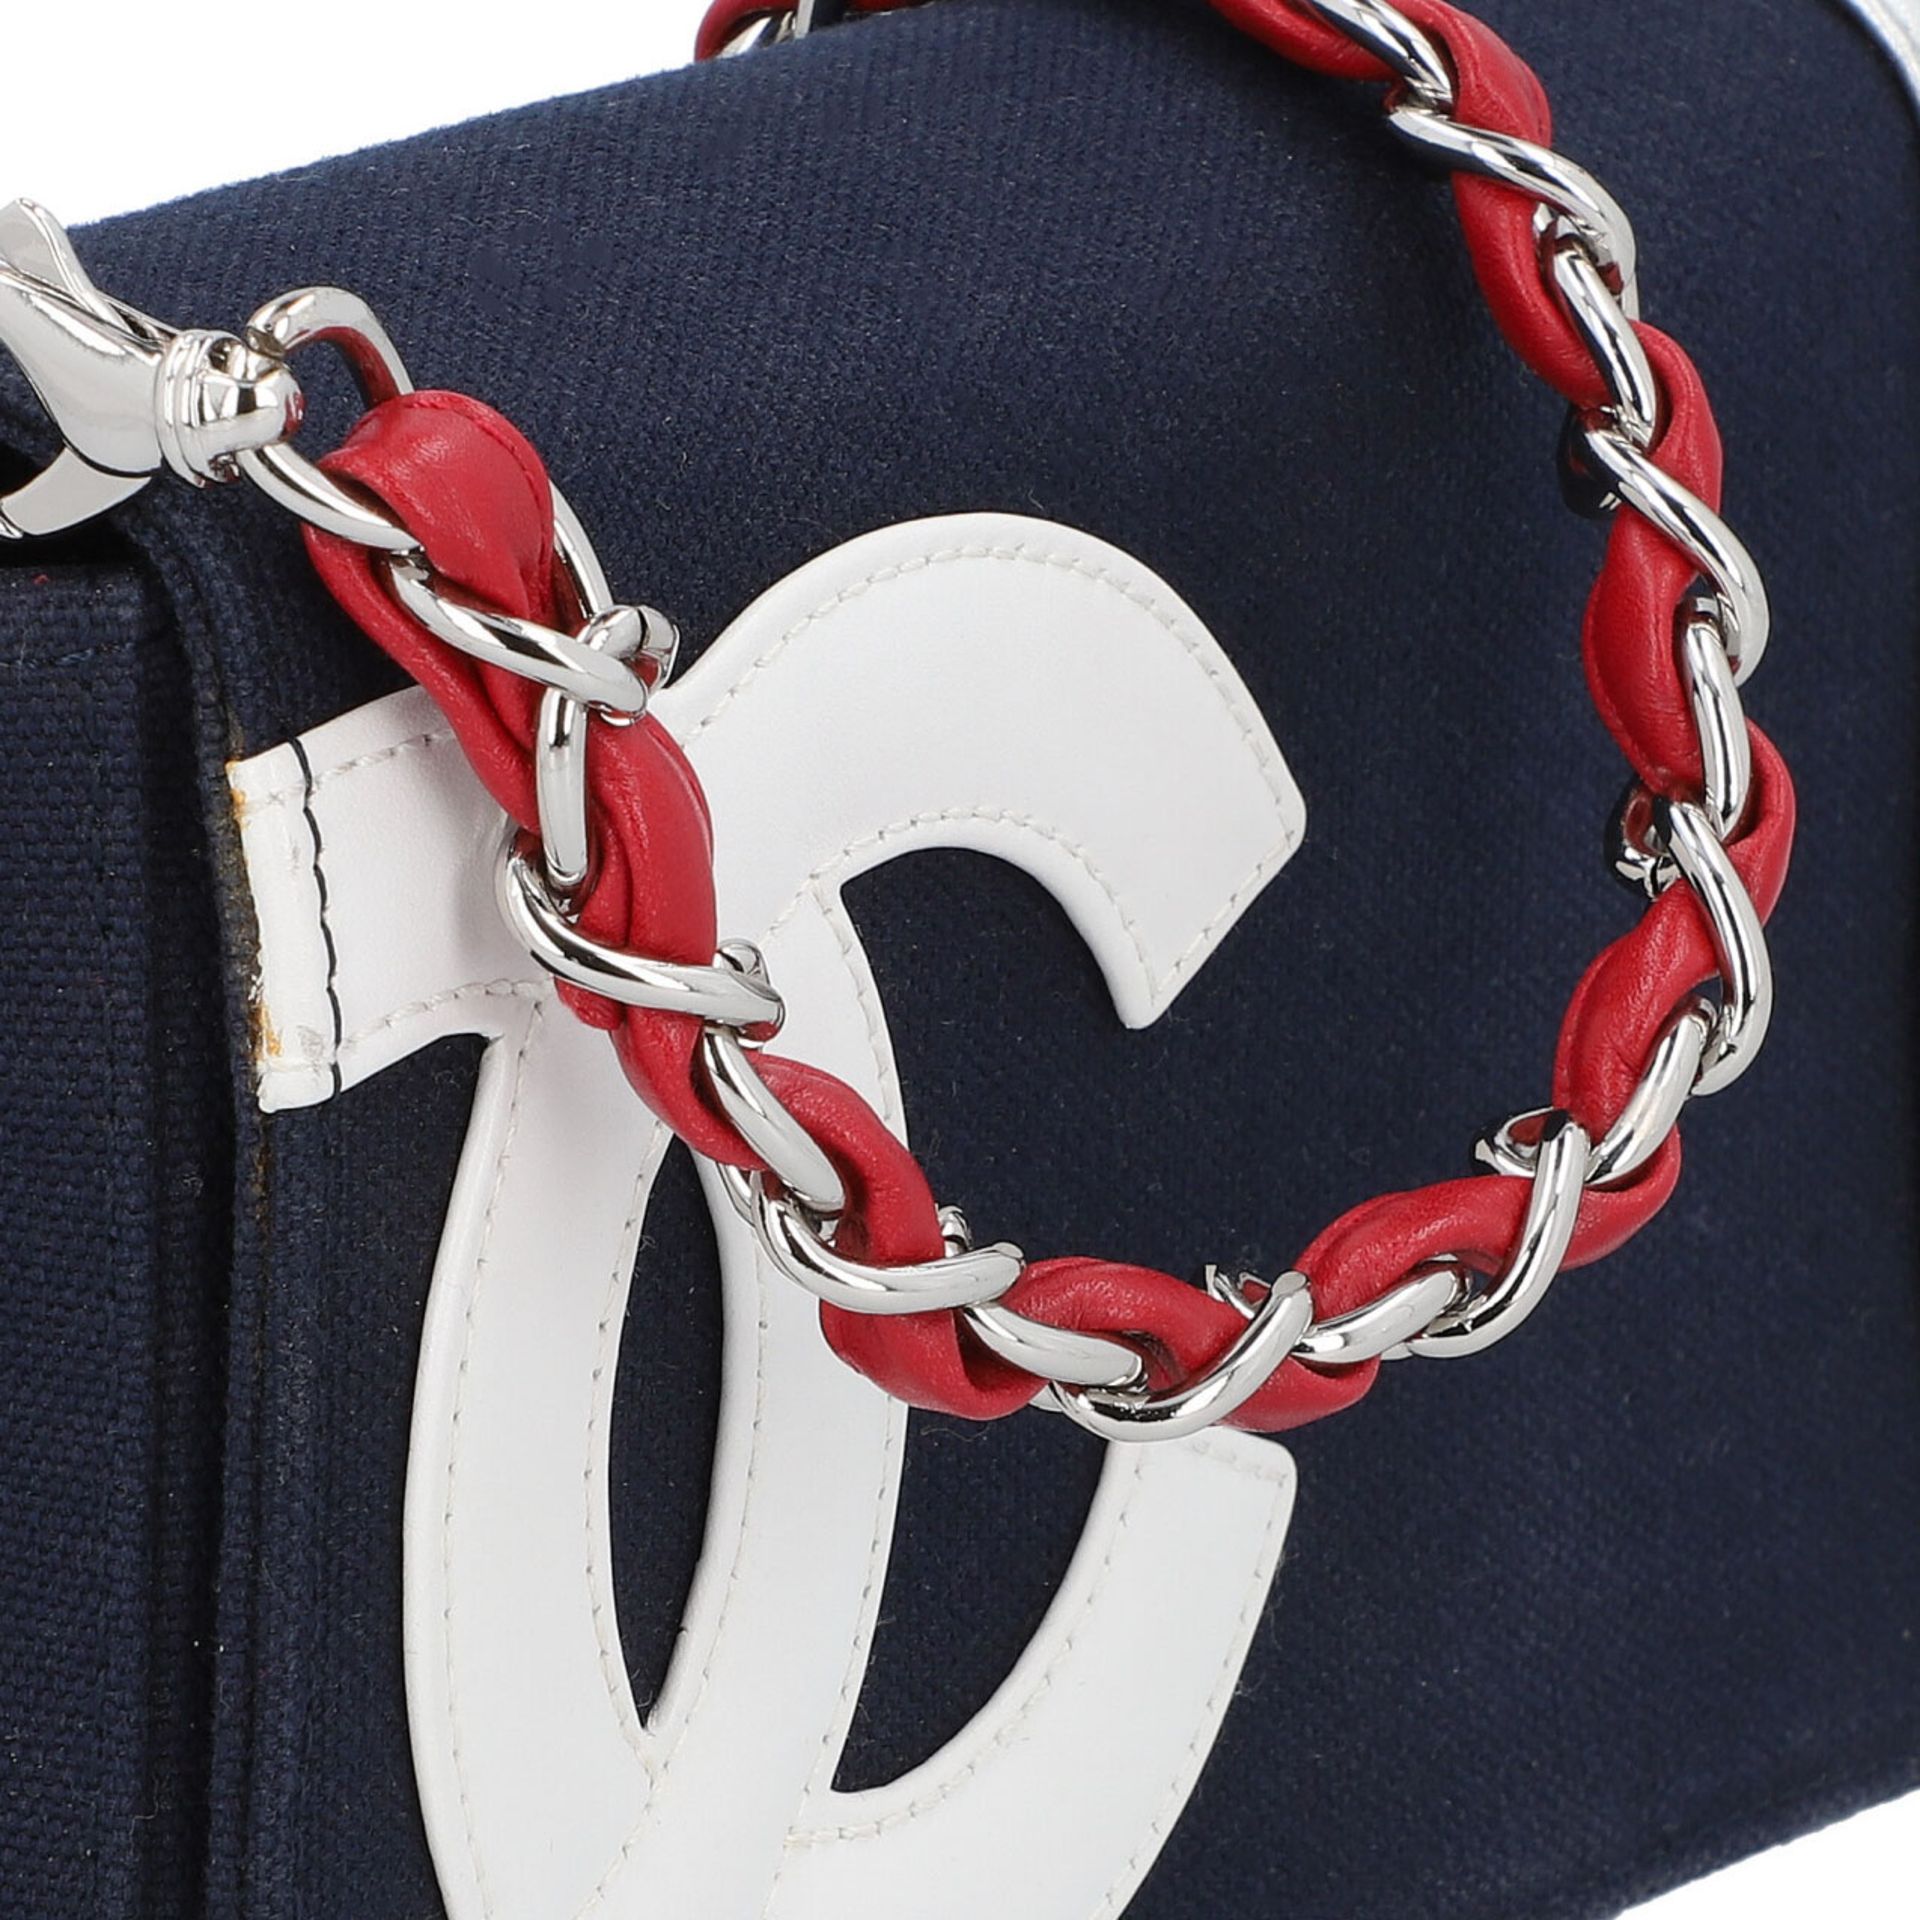 CHANEL Schultertasche "No. 5". - Image 8 of 8